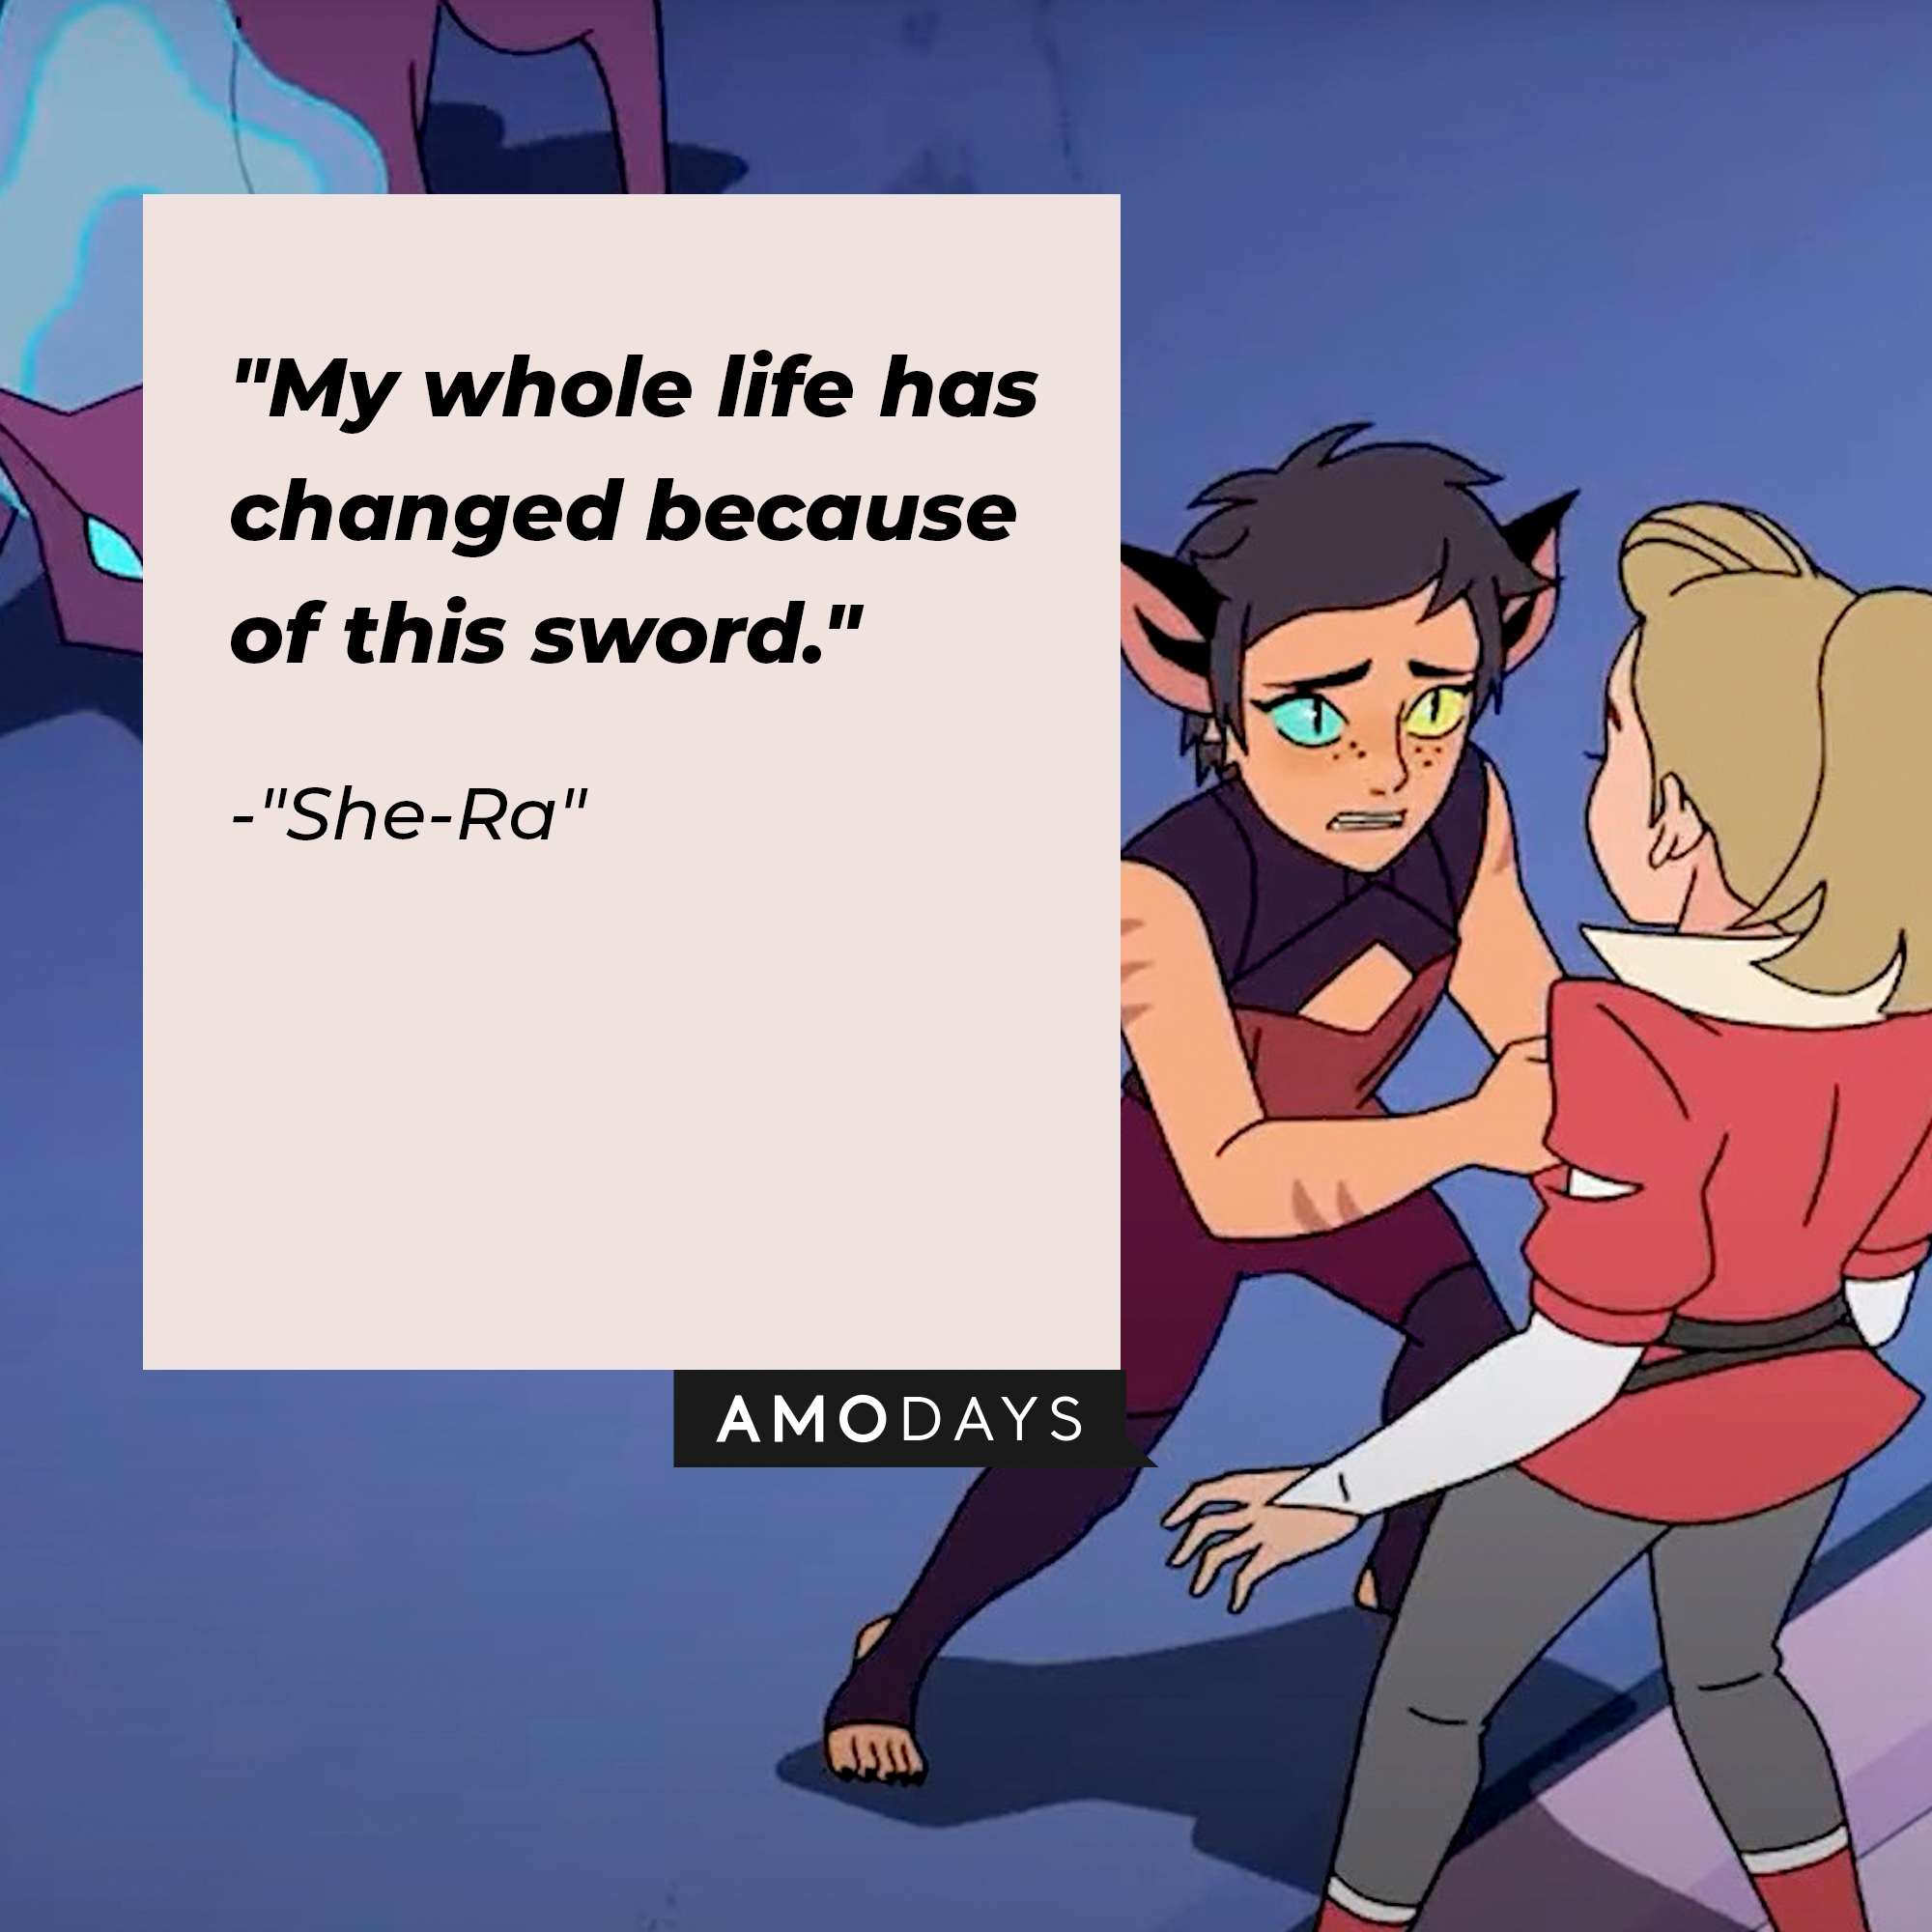 "She-Ra's" quote: "My whole life has changed because of this sword." | Source: Facebook.com/DreamWorksSheRa